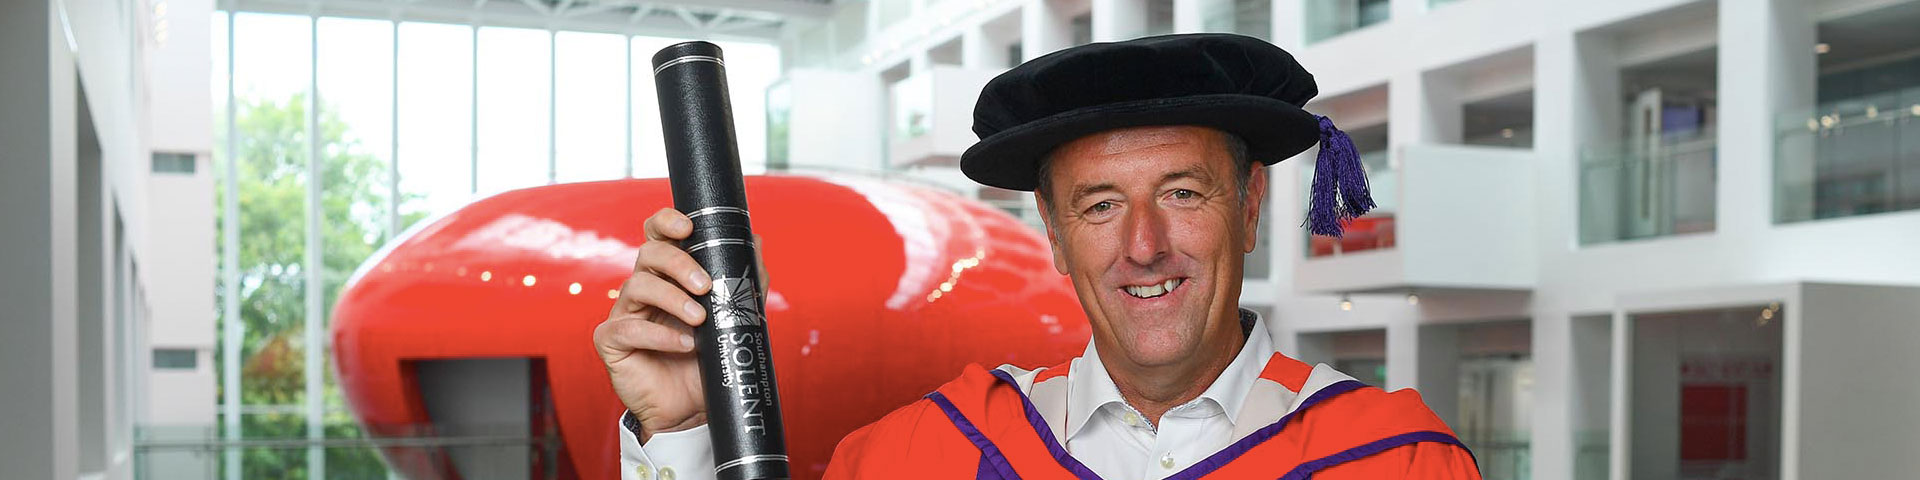 Saints legend, Matt LeTissier with his honorary degree from Solent University